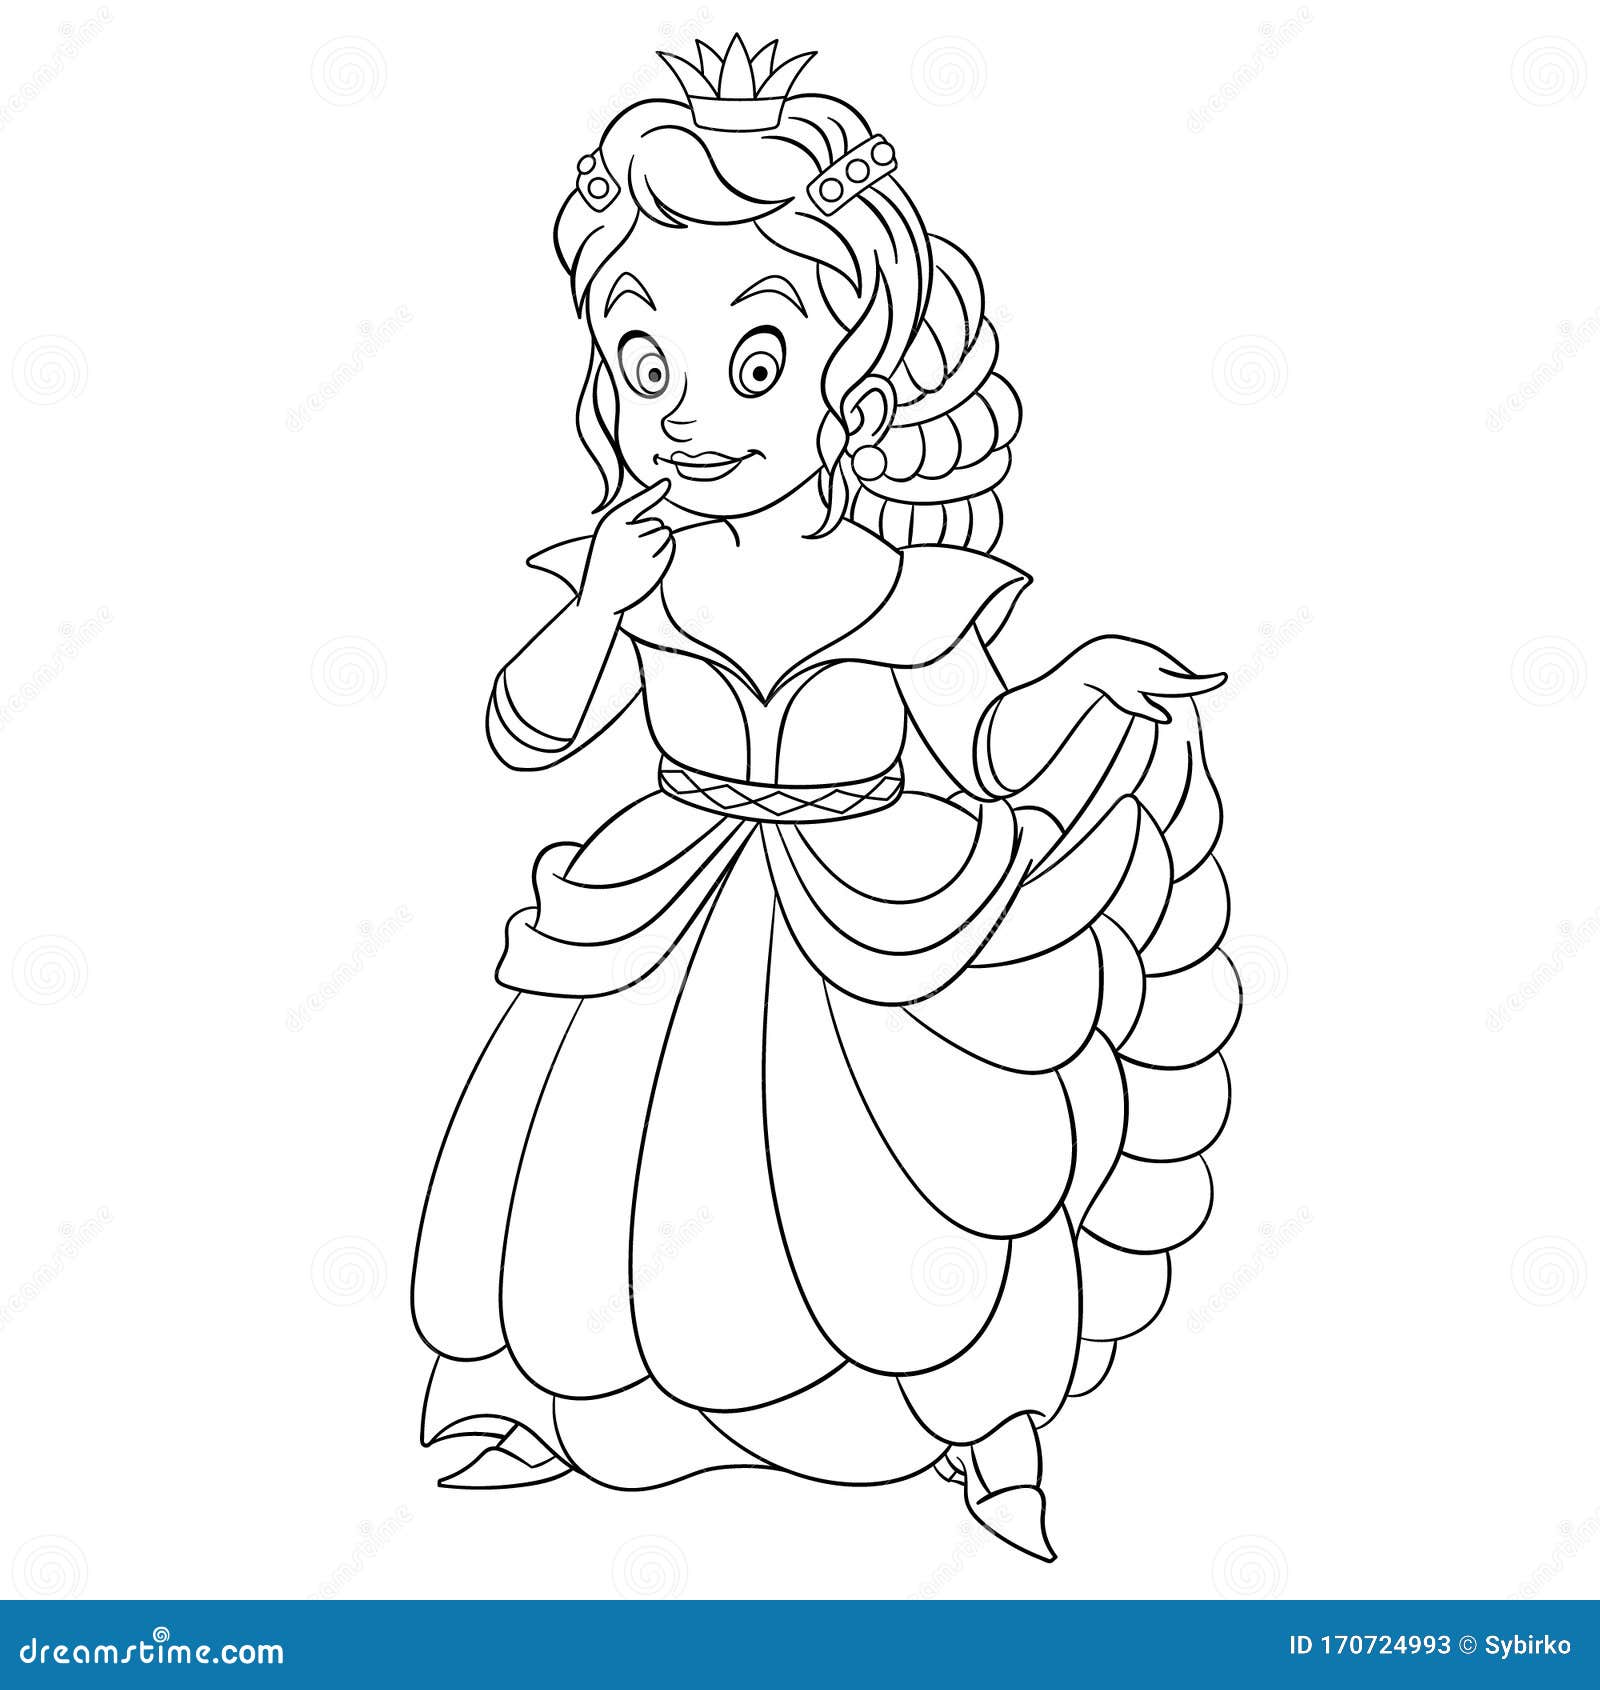 Coloring page with princess stock vector